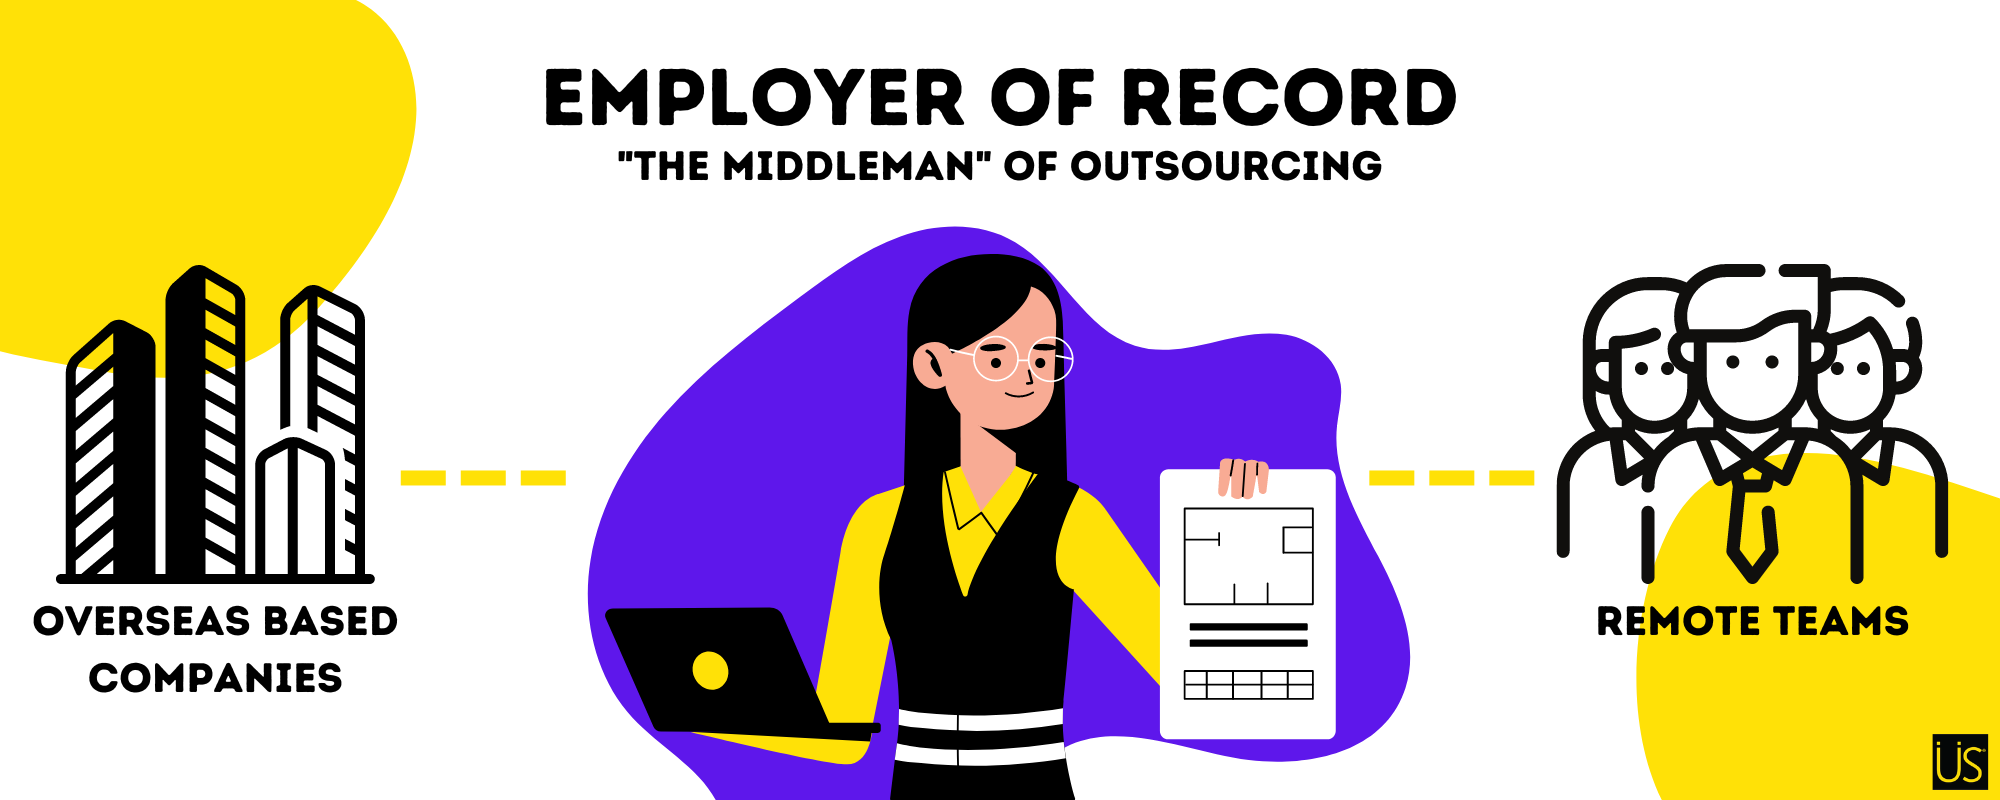 Employer of Record is the Middleman